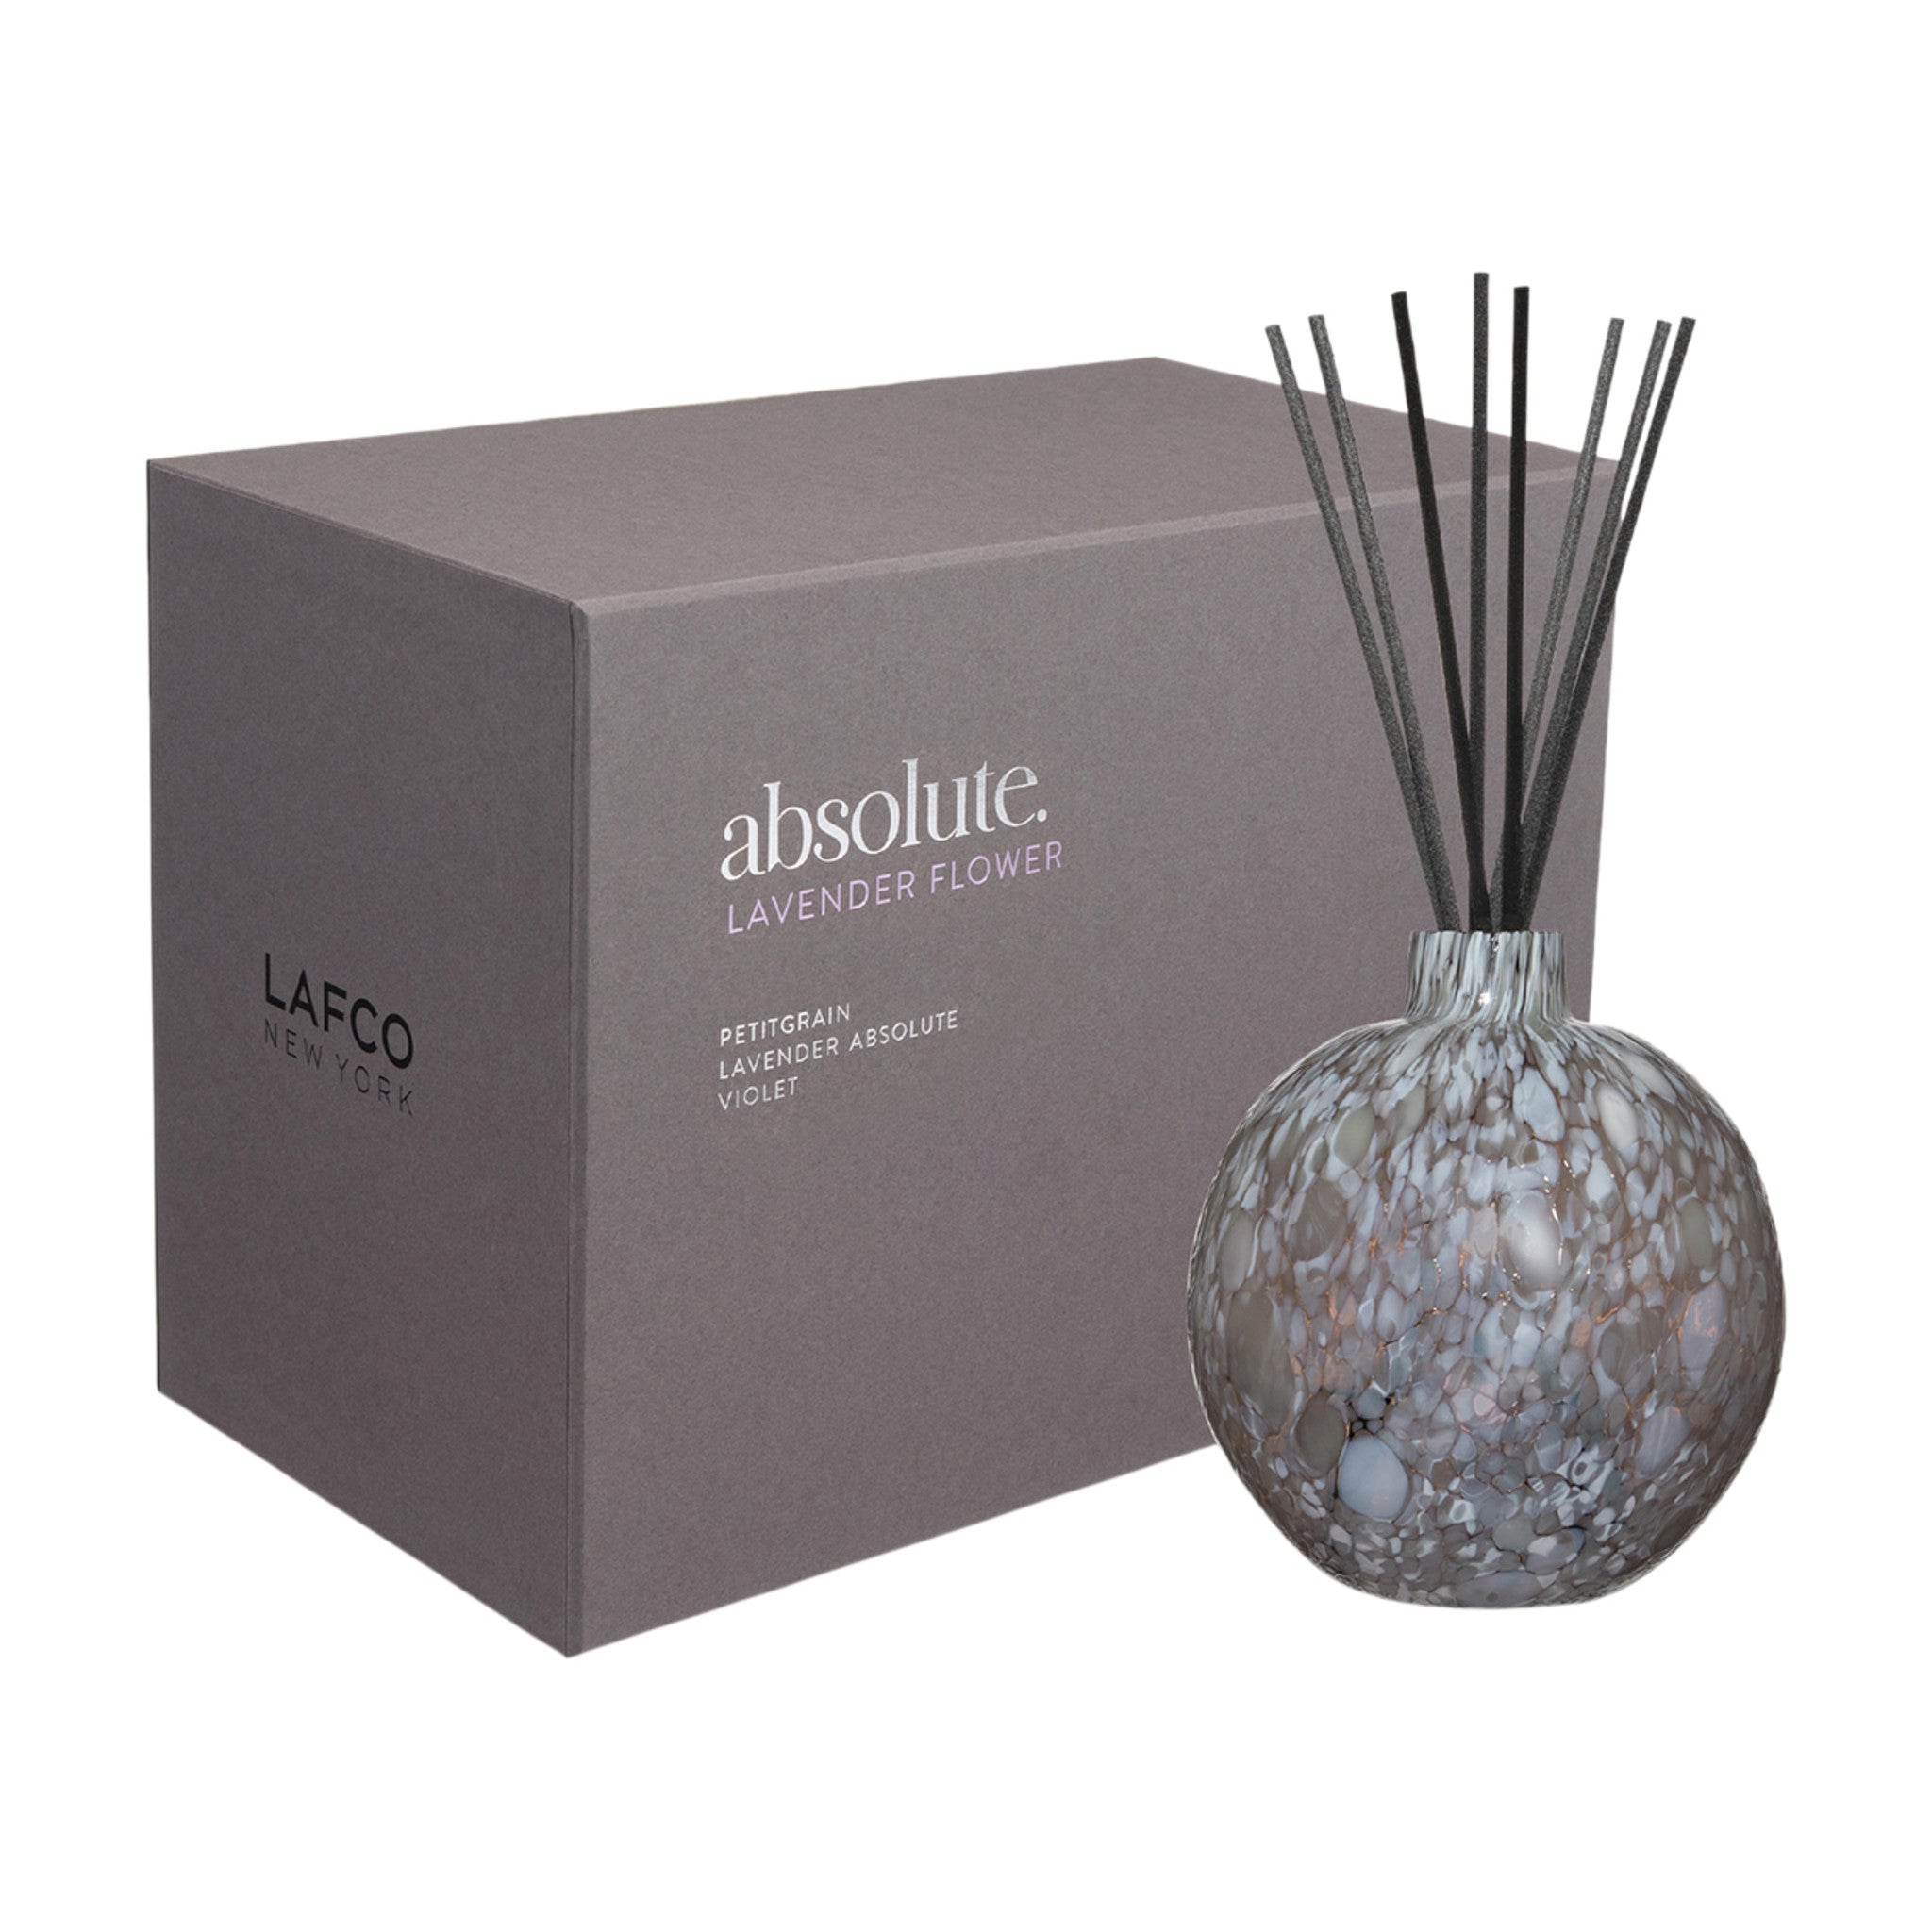 Lafco Lavender Flower Absolute Diffuser main image.